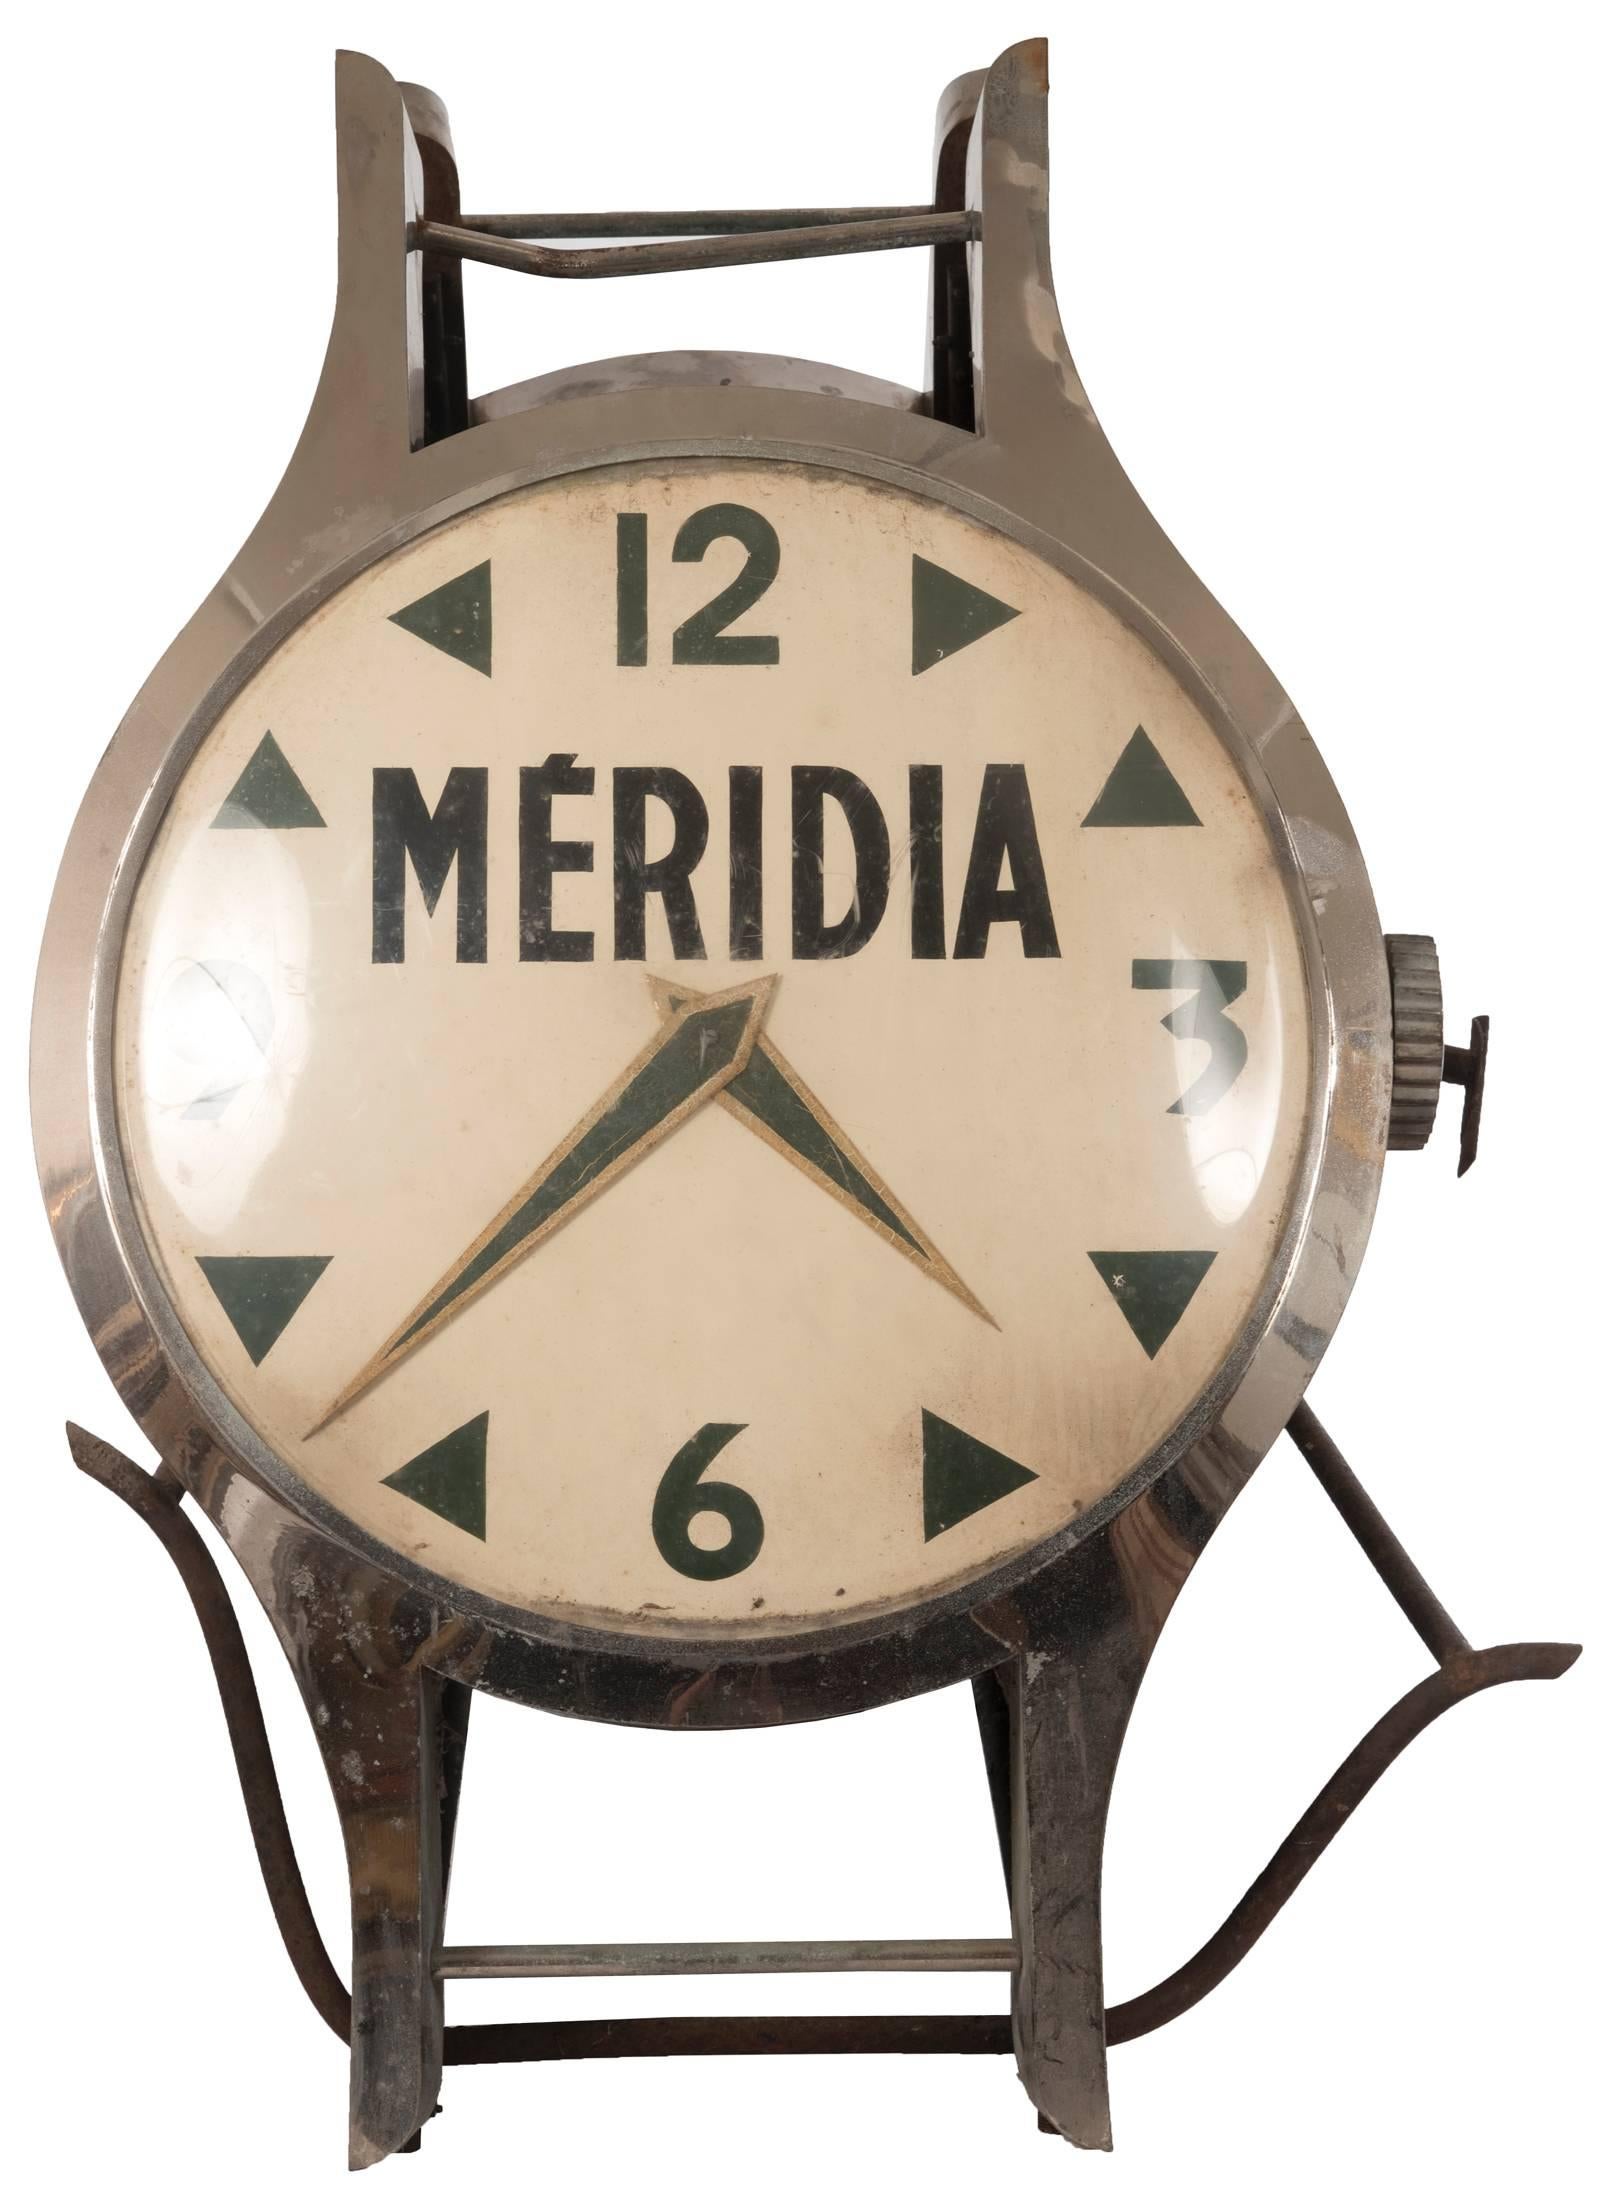 Midcentury French Meridia Wristwatch Taxicab Advertisement In Good Condition For Sale In Salt Lake City, UT